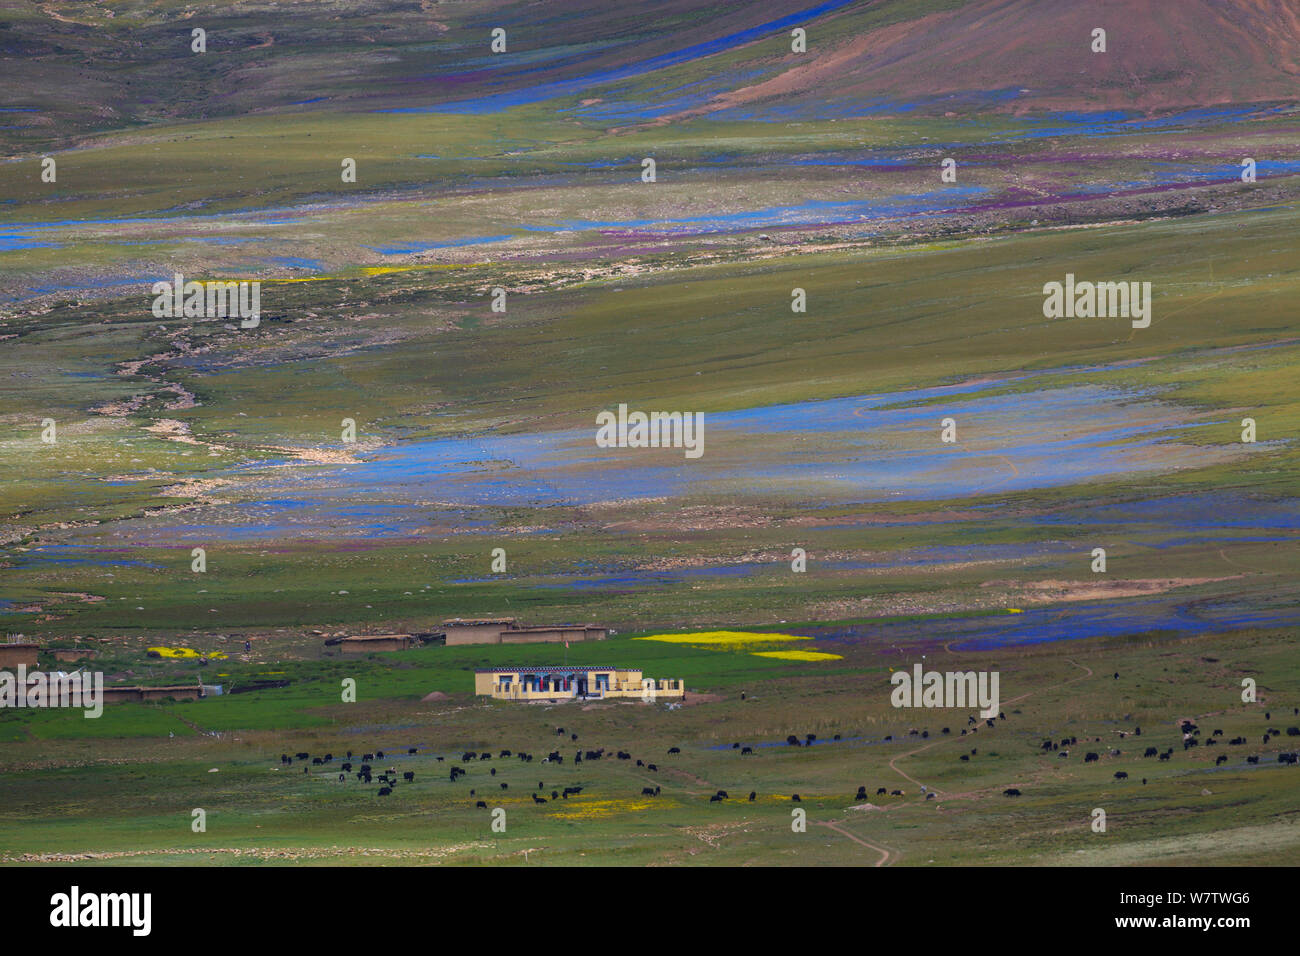 Landscape of plateau in high altitude plateau, with bright colours from different plants, Shiqu County, Sichuan Province, China, August 2010. Stock Photo